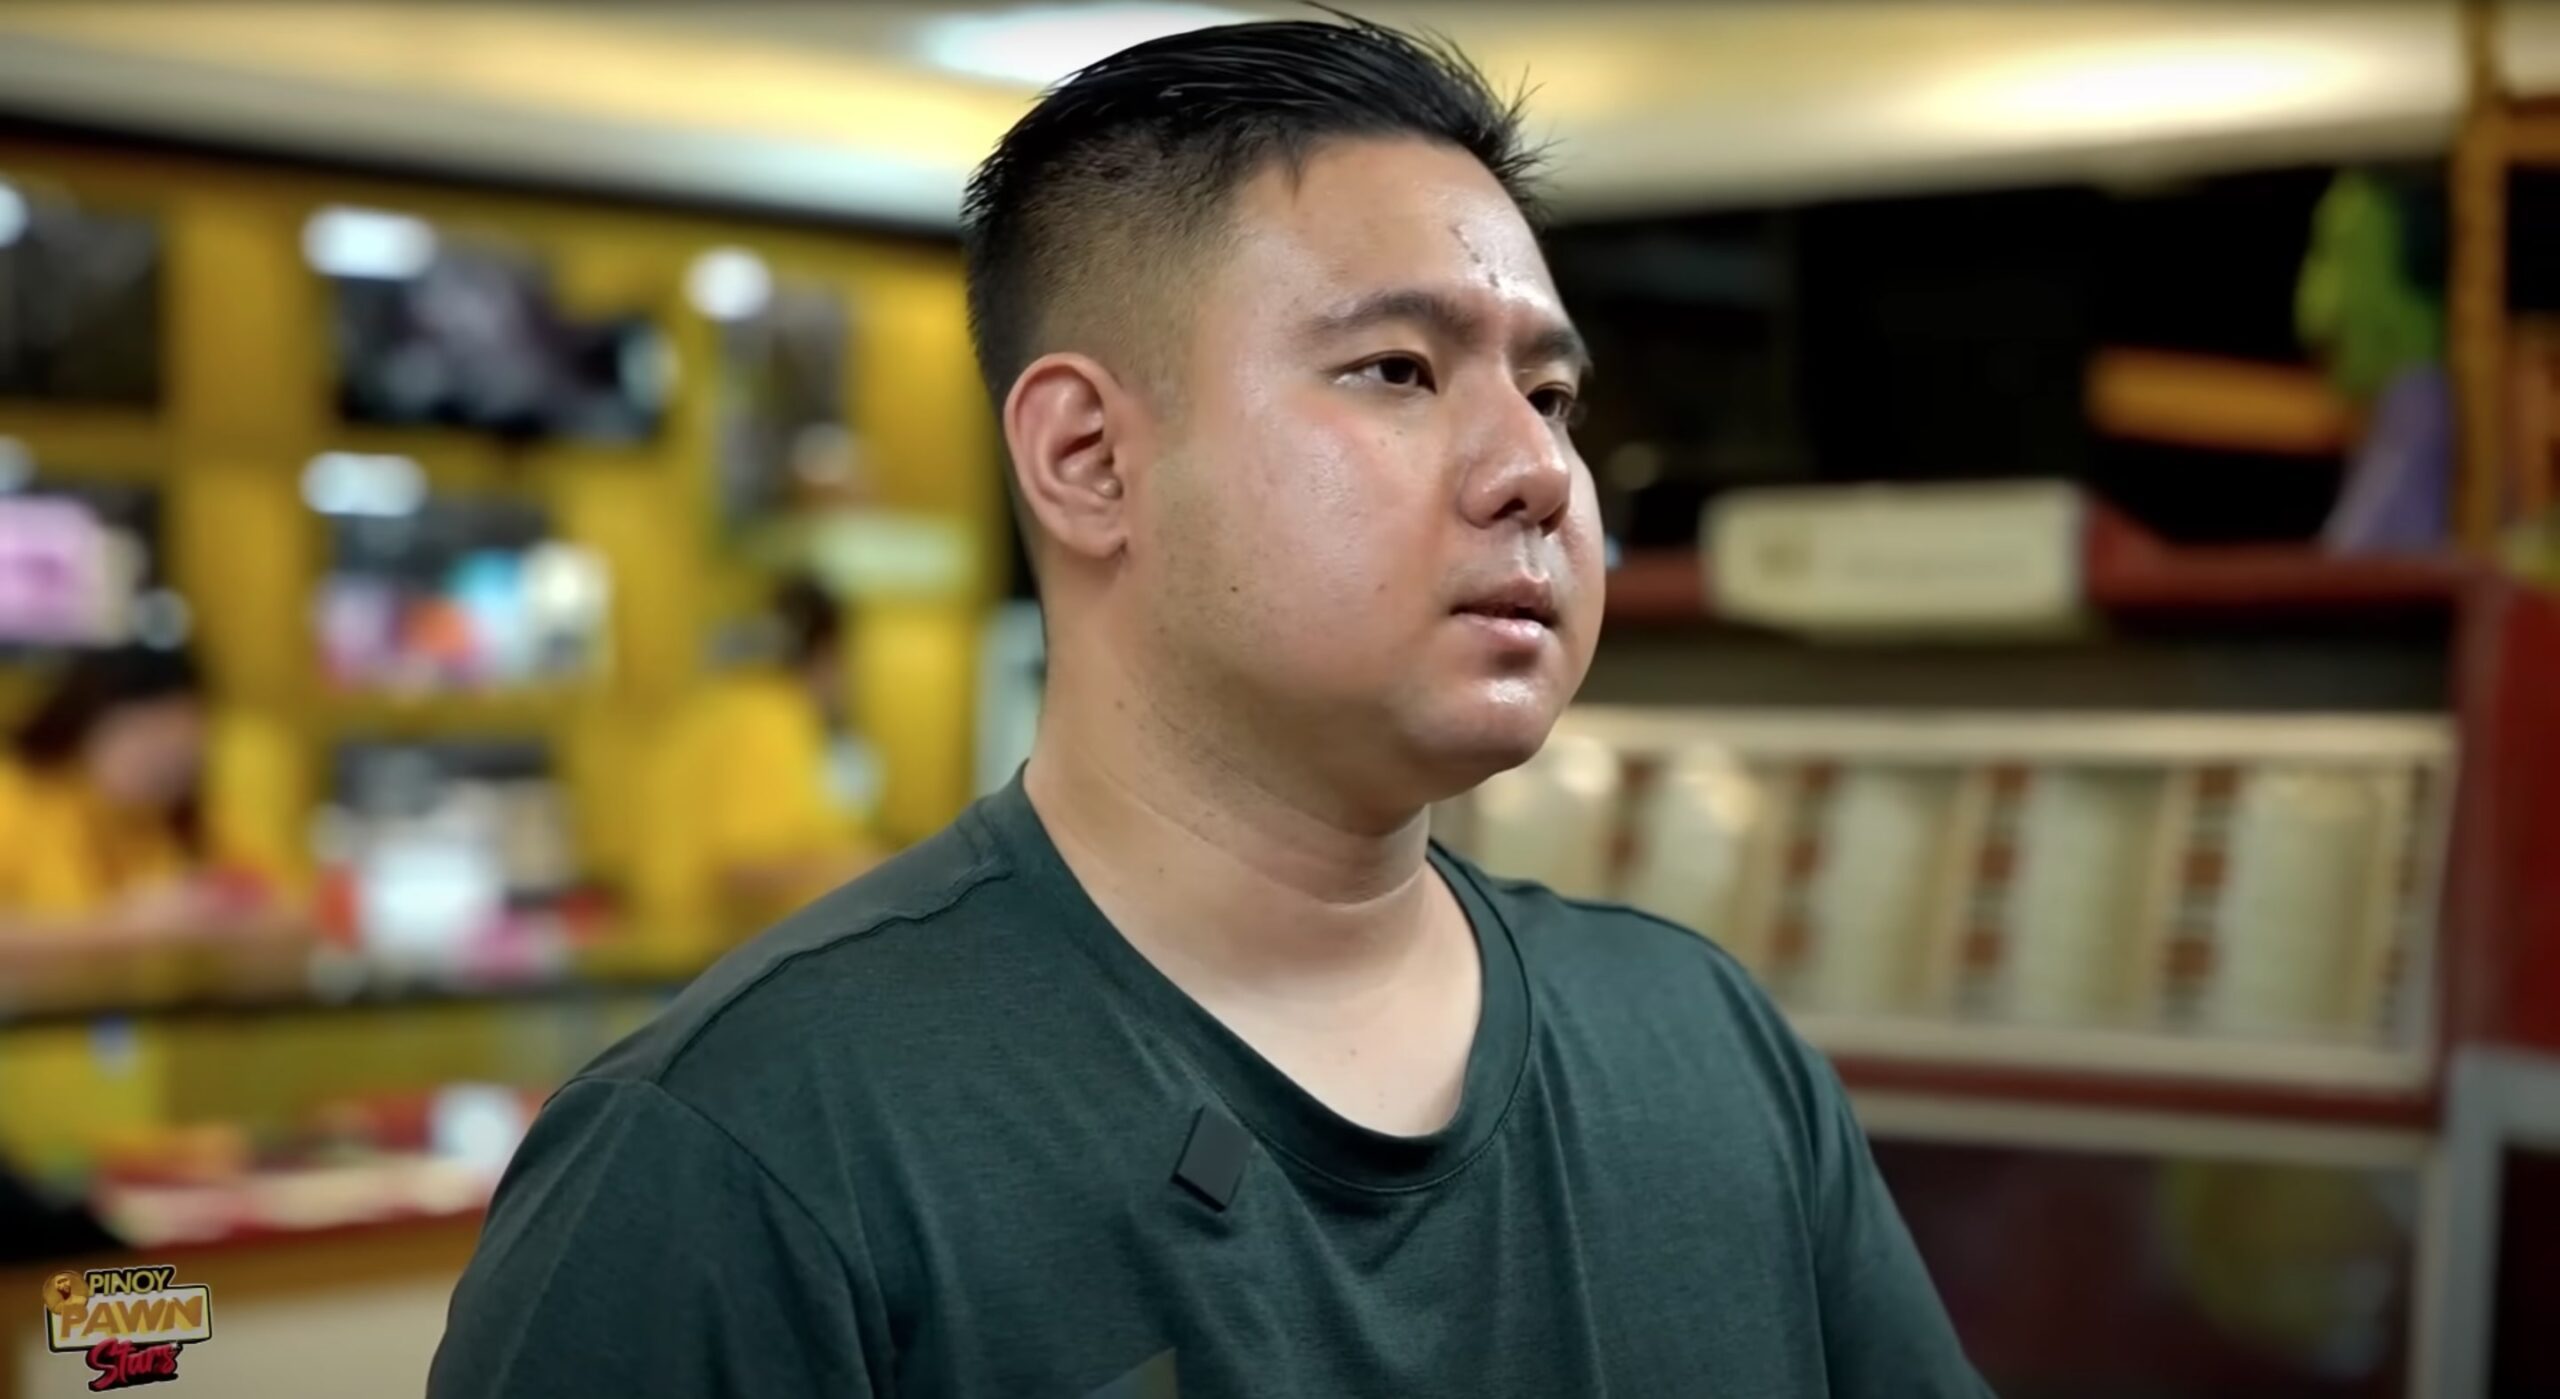 Jiro Manio sells Gawad Urian trophy for ‘Magnifico’ performance on ‘Pinoy Pawnstars’